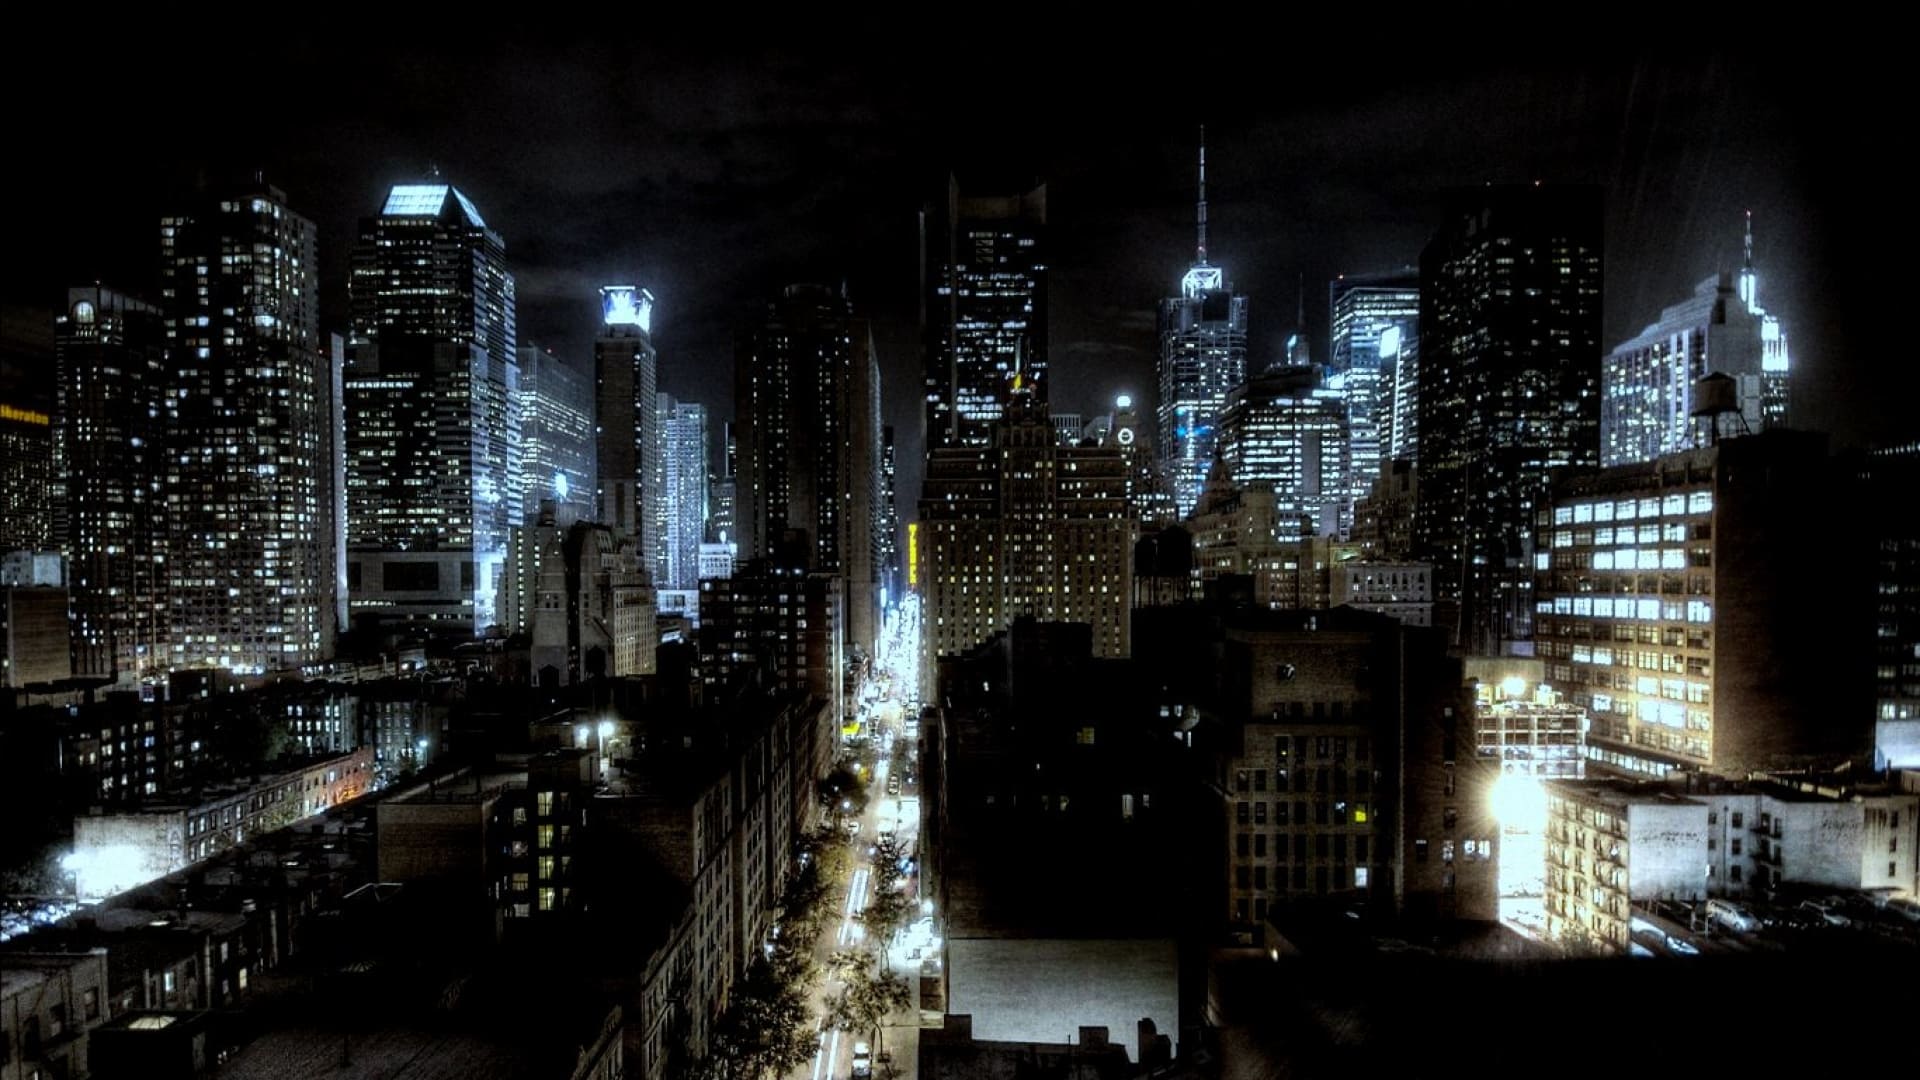 Night city wallpaper for your PC, laptop, tablet, mobile phone - New York